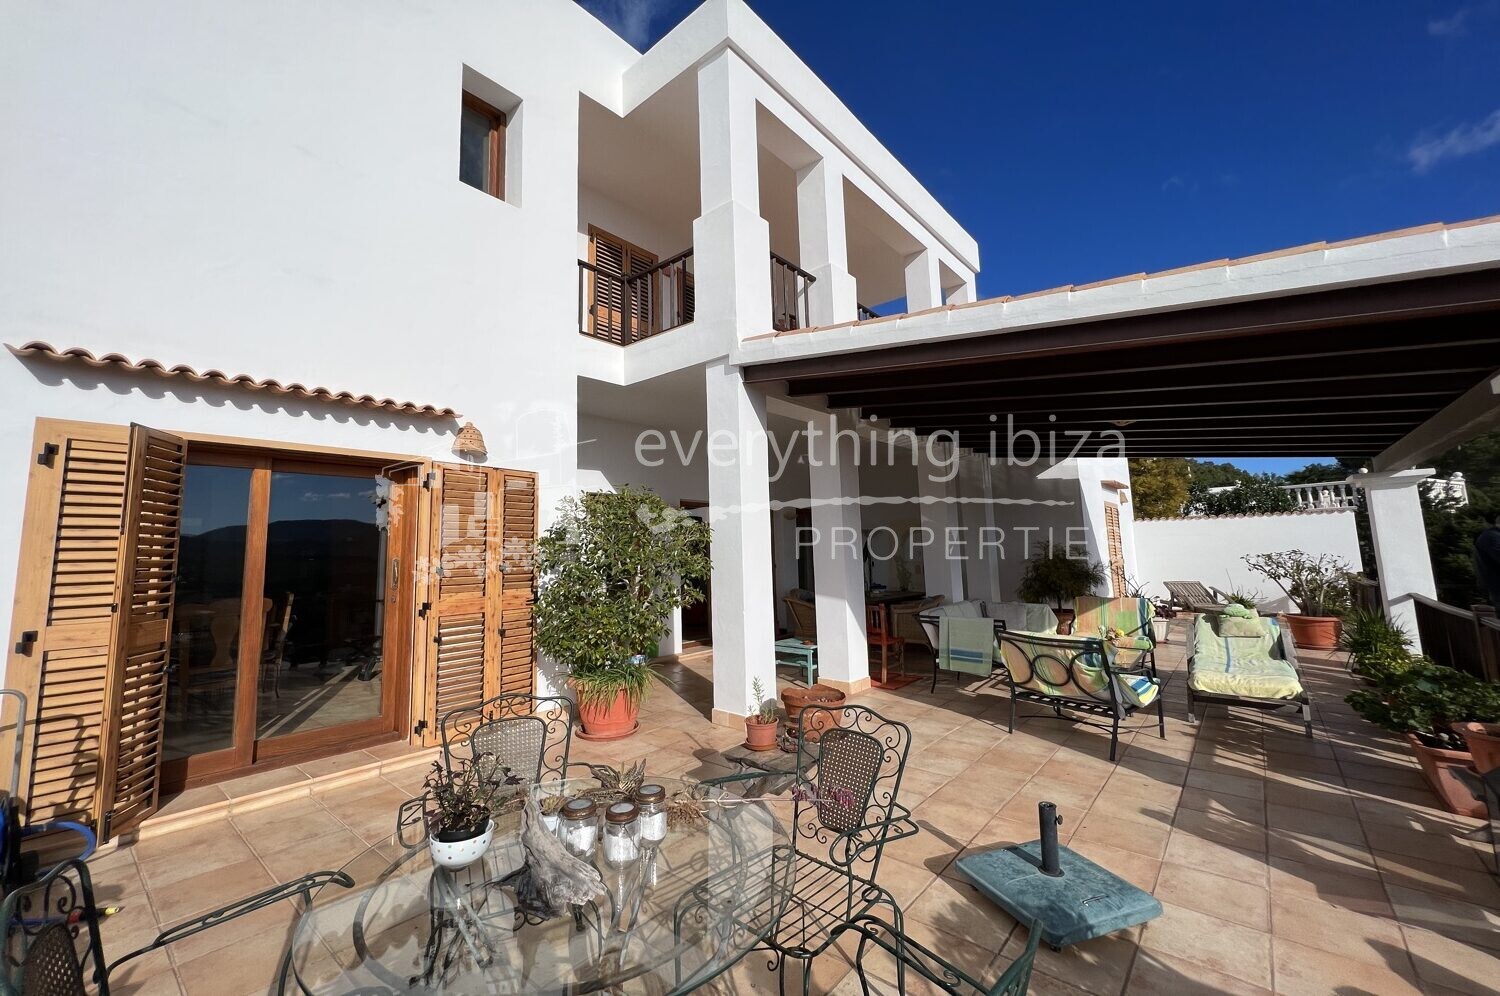 Magnificent Hilltop Villa with Super Views, ref. 1429, for sale in Ibiza by everything ibiza Properties